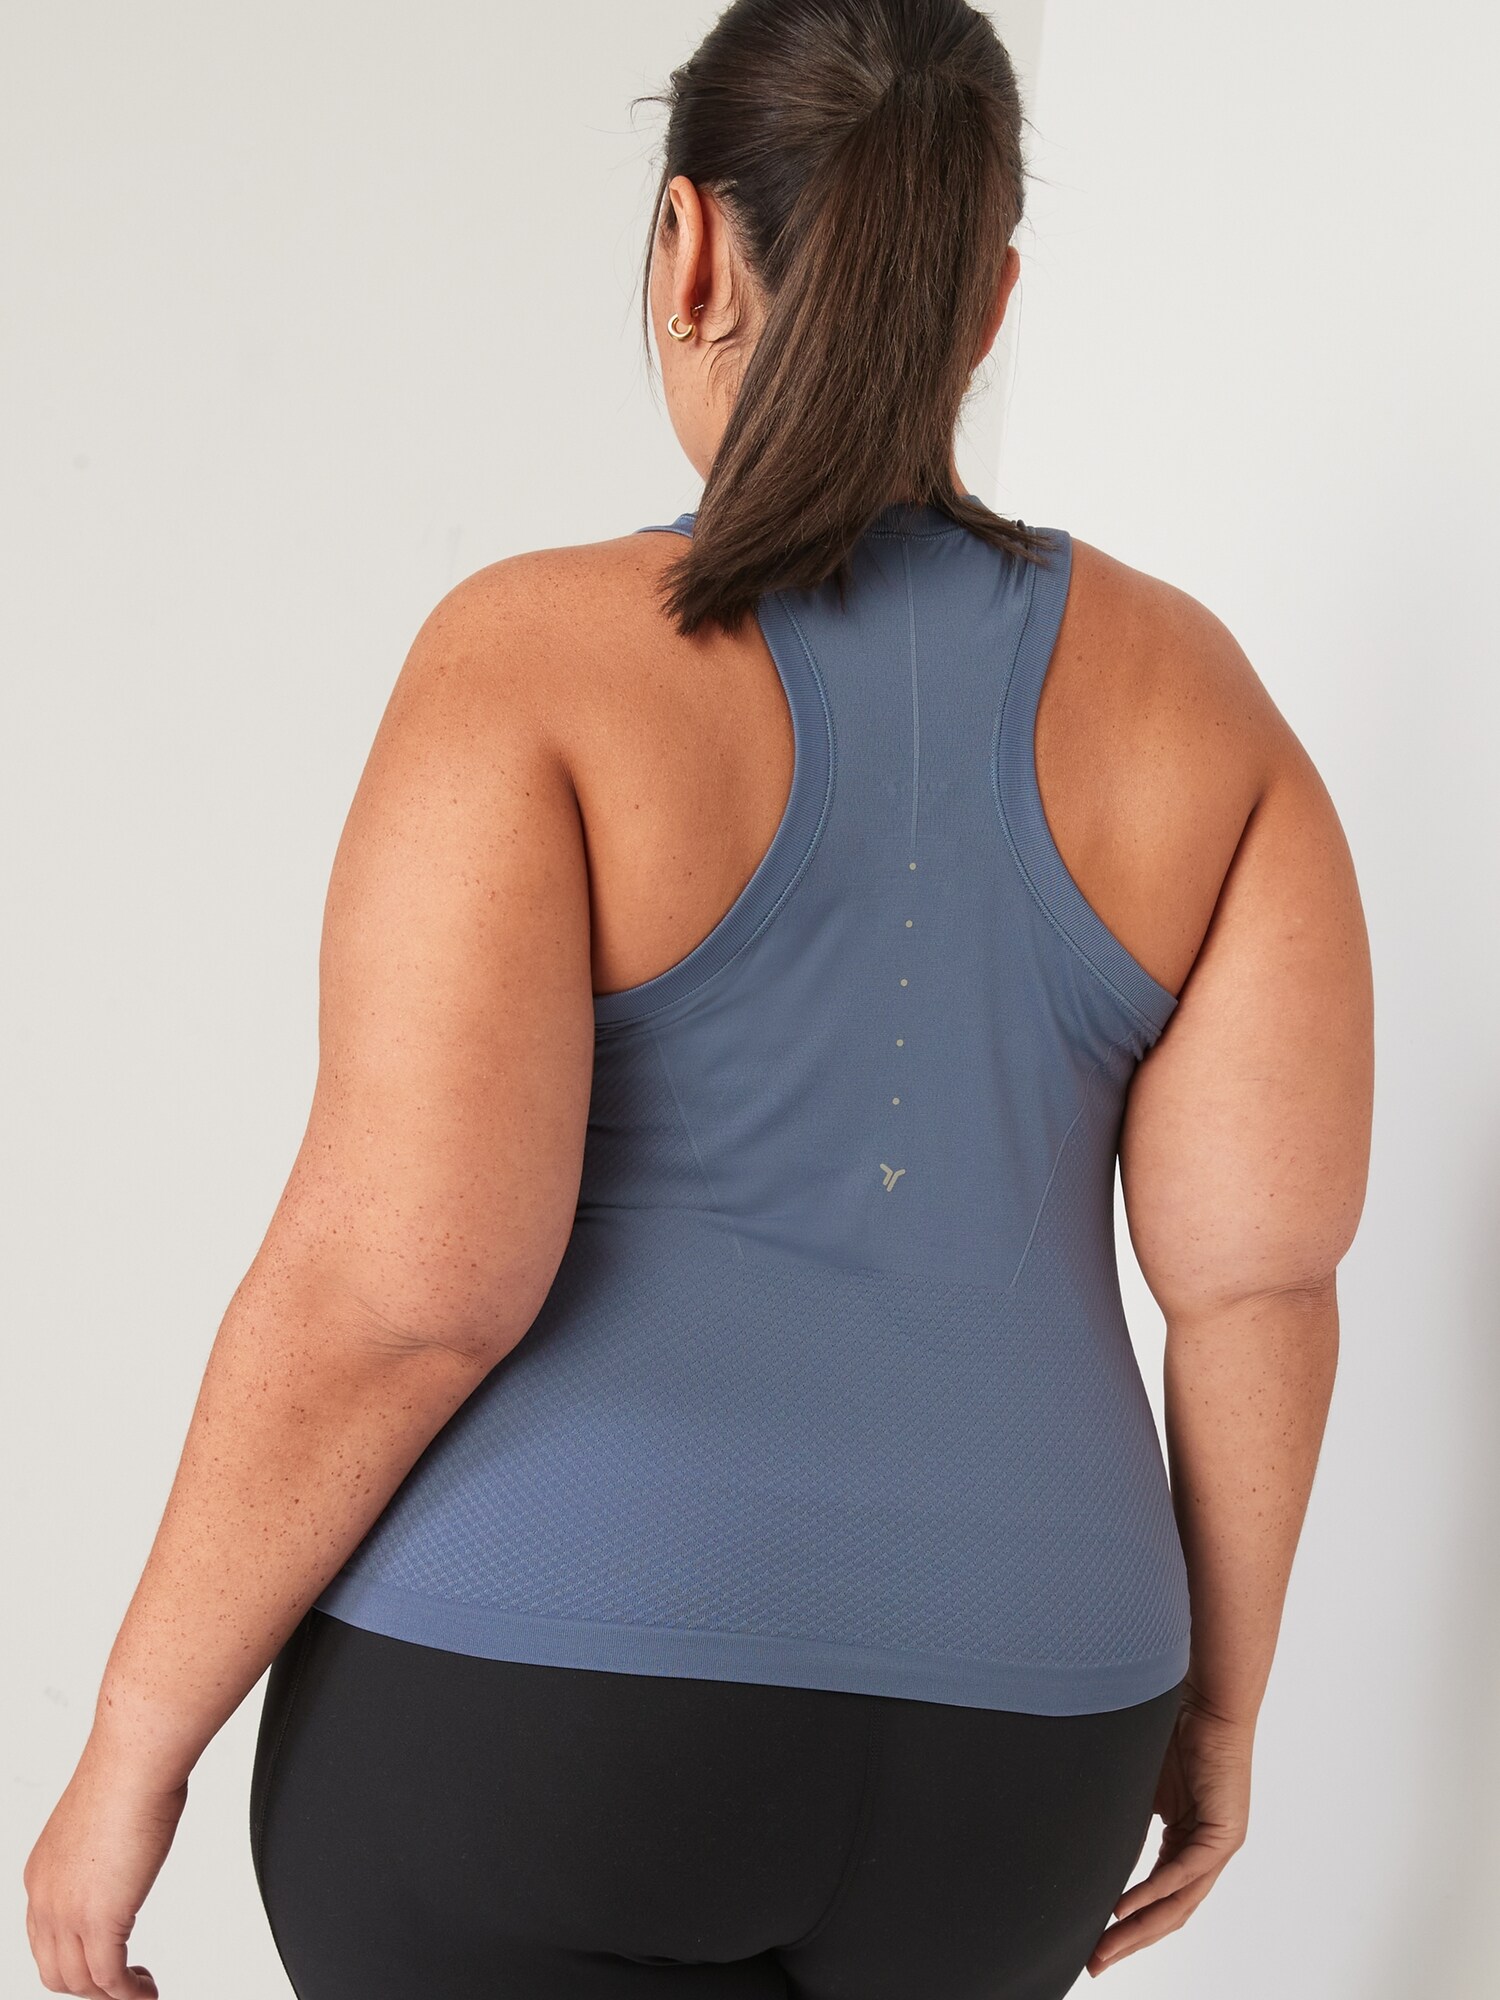 Seamless Performance Racerback Tank Top for Women, Old Navy